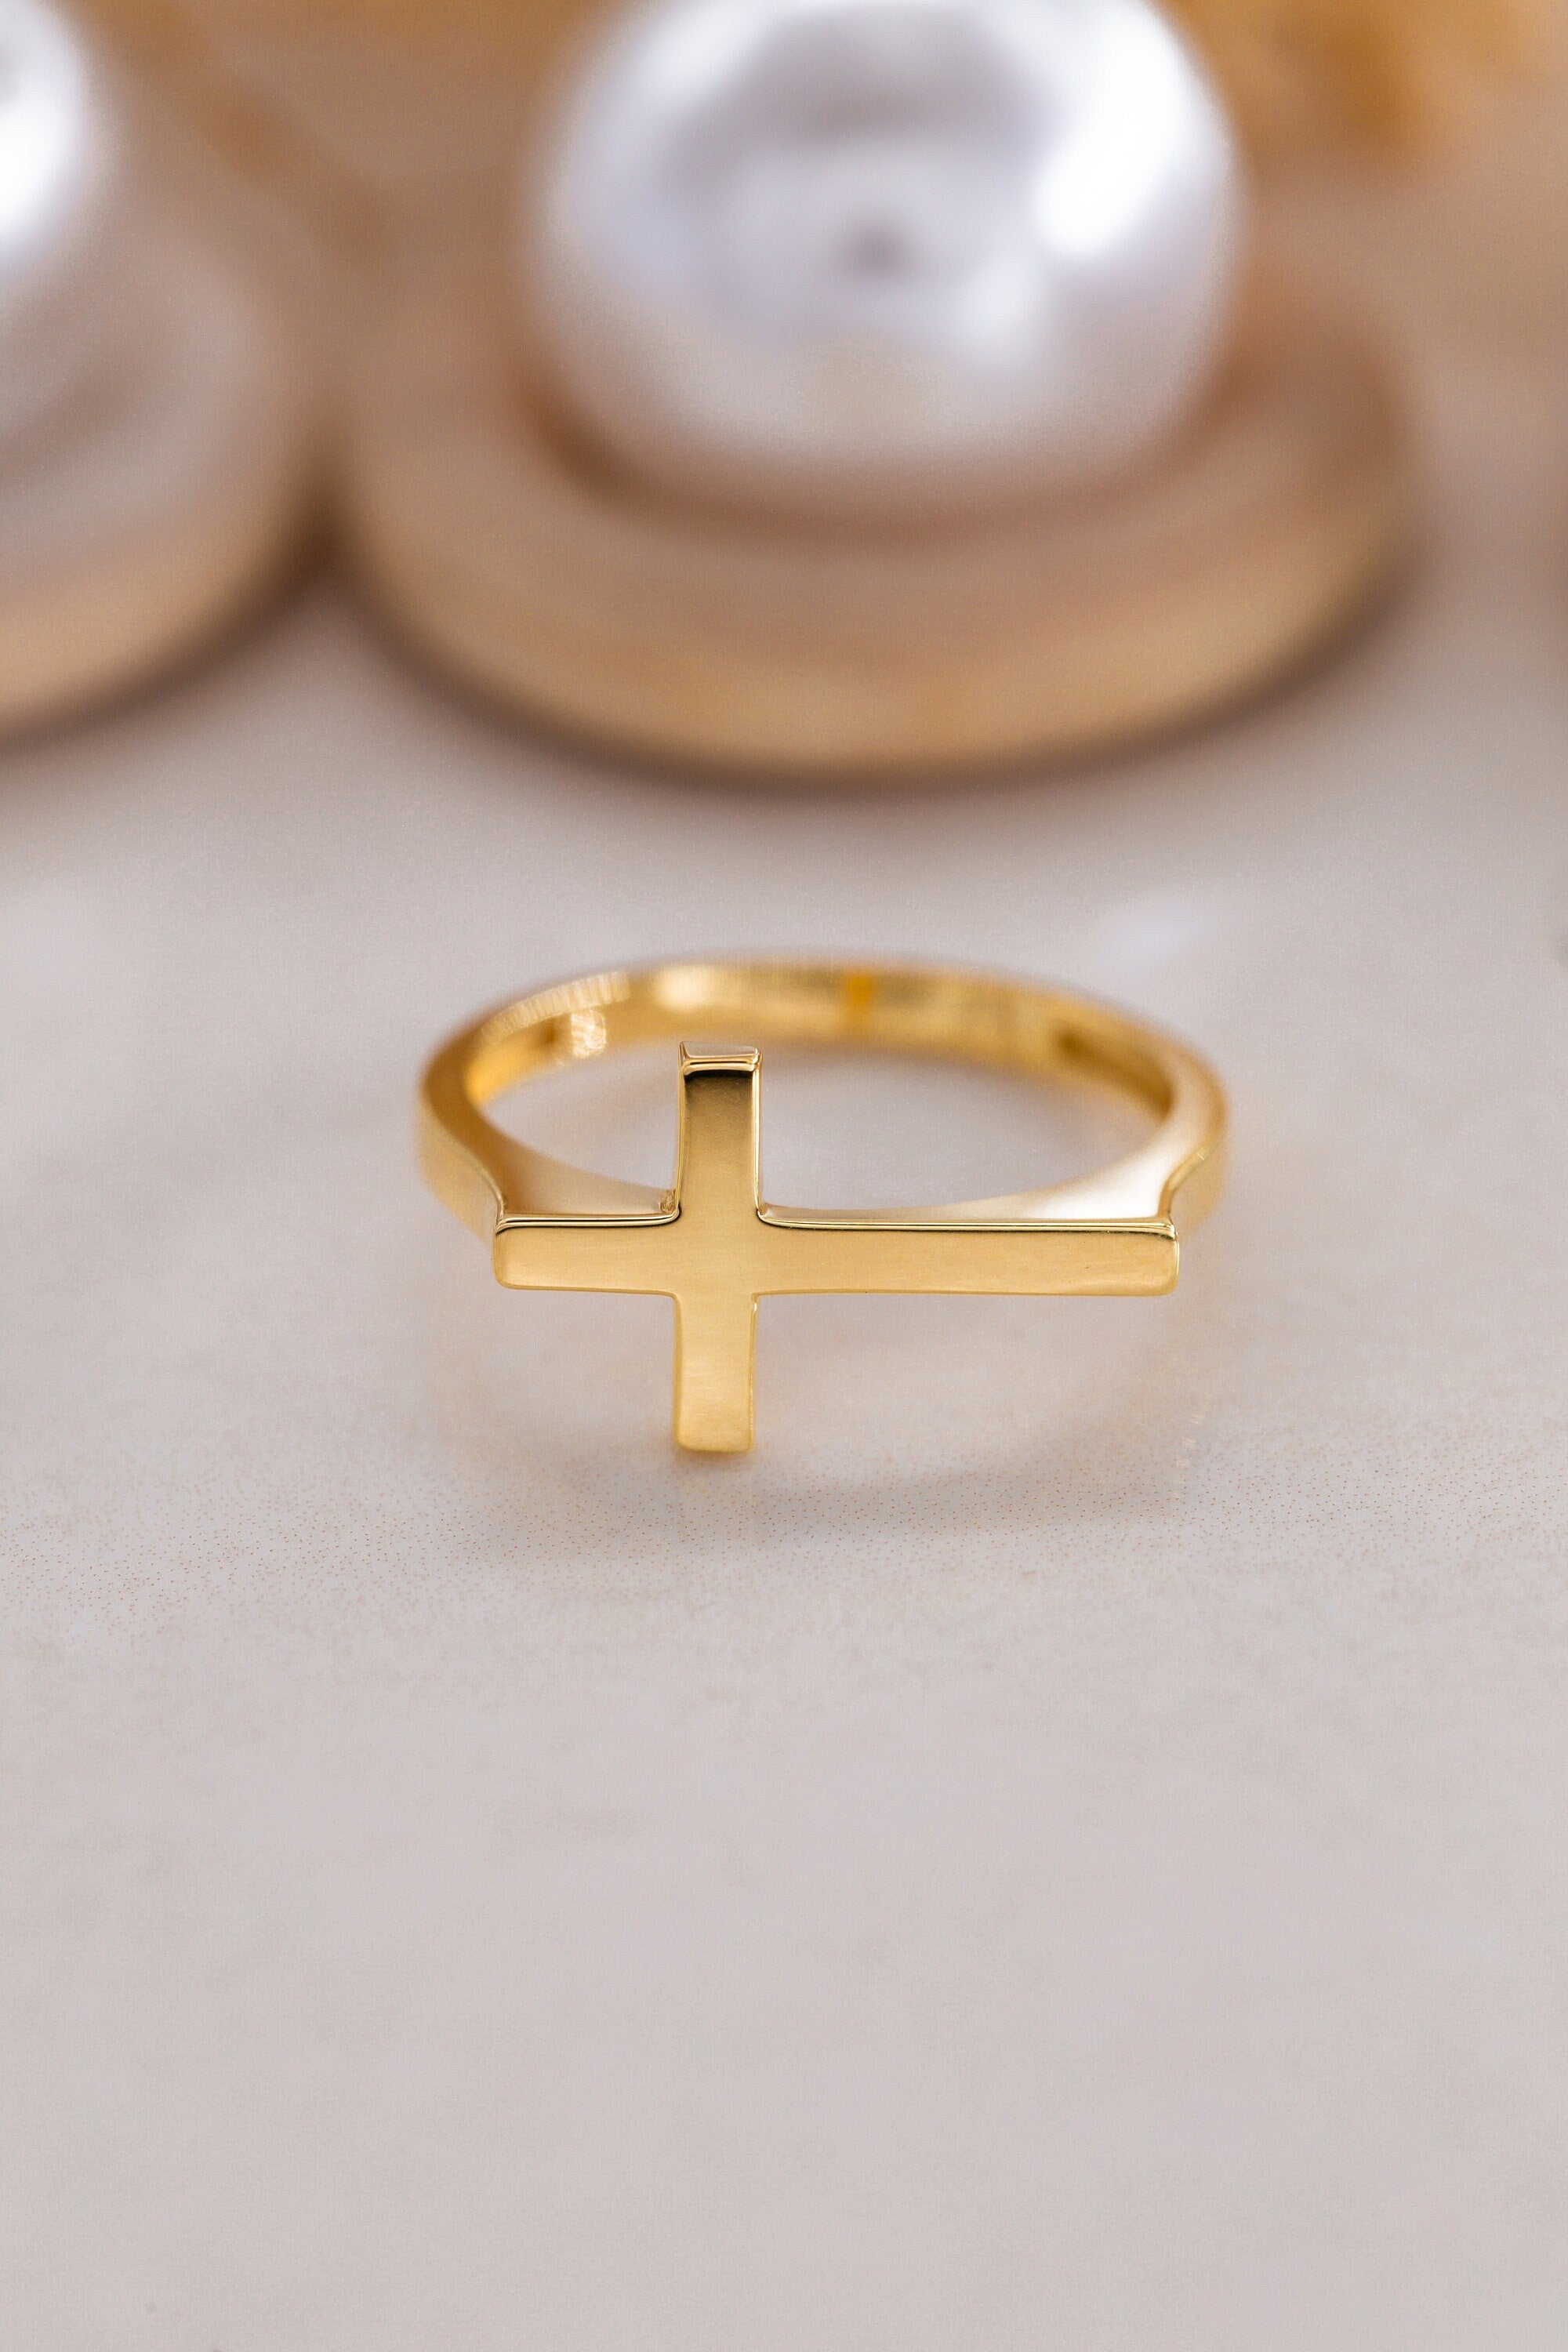 14K Gold Plain Cross Ring, Religious Symbol Ring, 925 Silver Religious Ring Gift, Jesus Ring, Faith-Inspired Jewelry, Religious Accessories